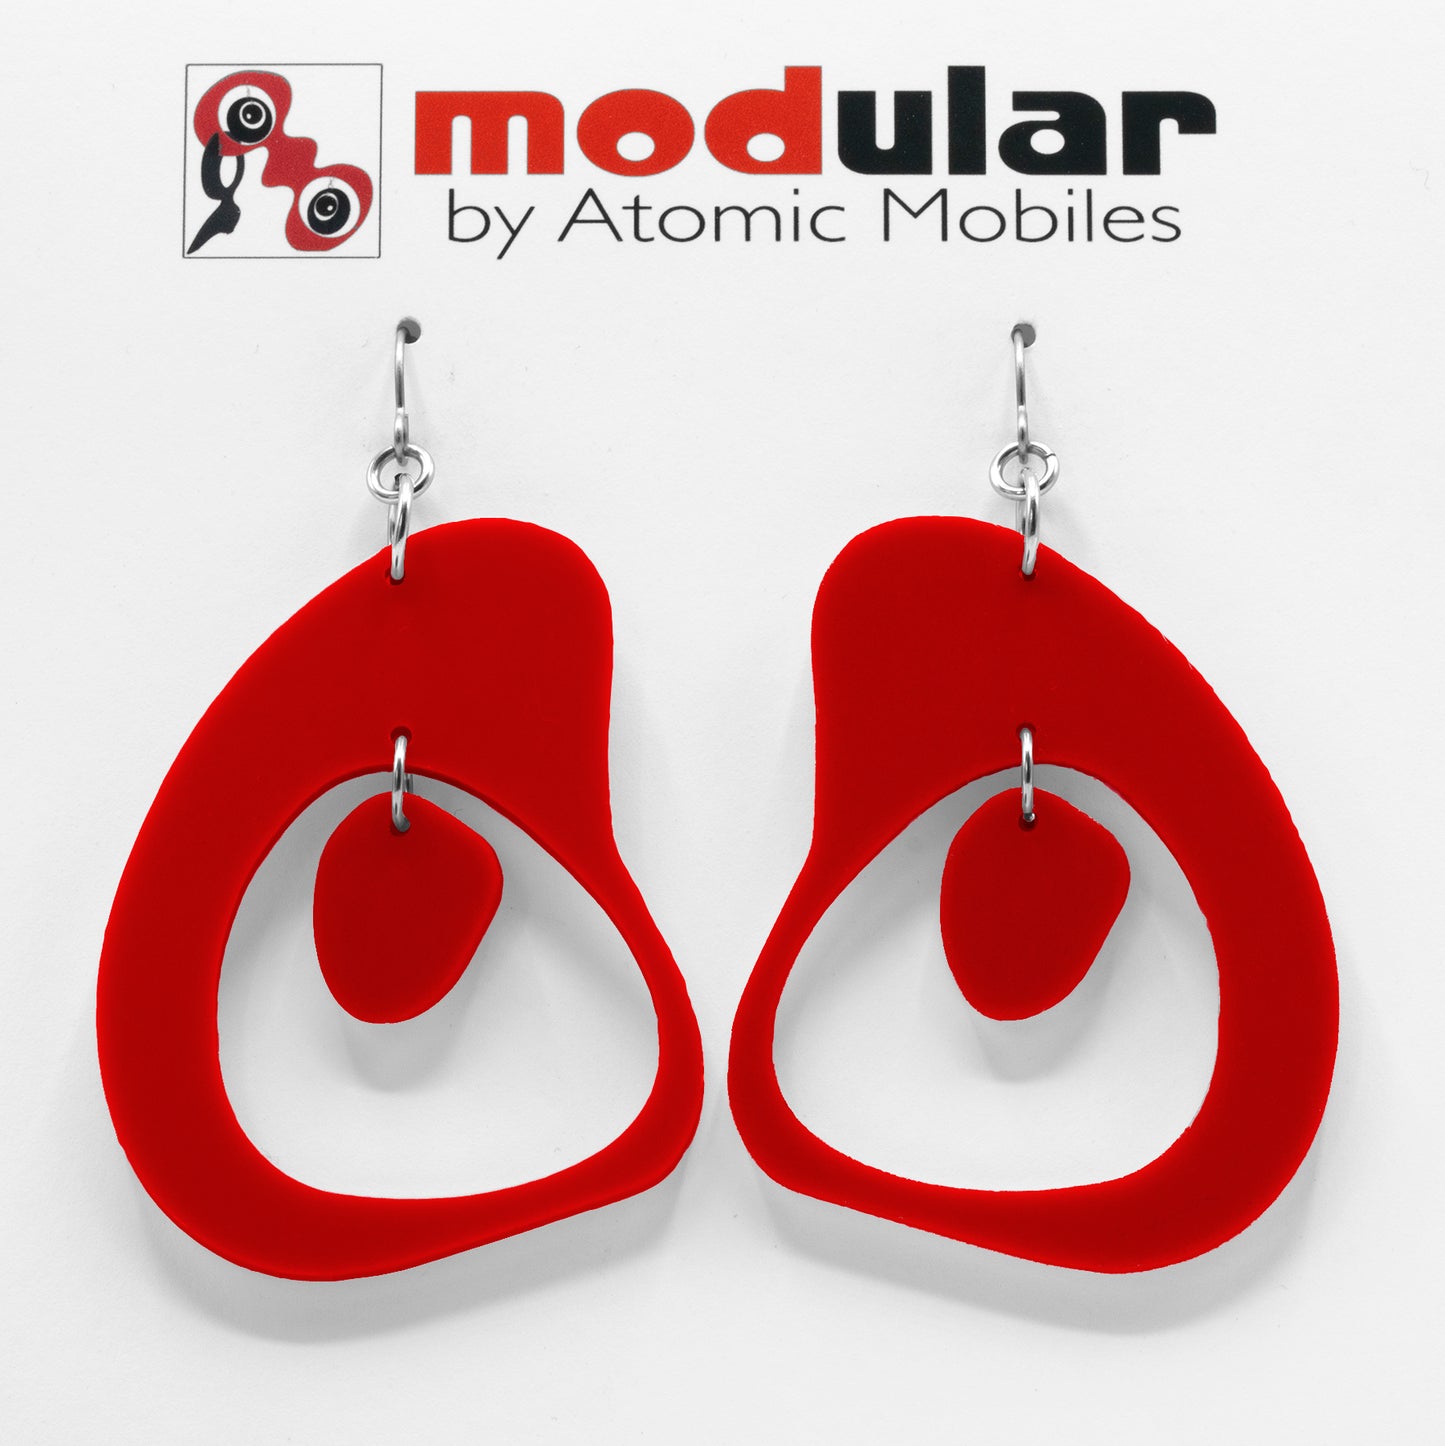 MODular Earrings - Boomerang Statement Earrings in Red by AtomicMobiles.com - retro era inspired mod handmade jewelry